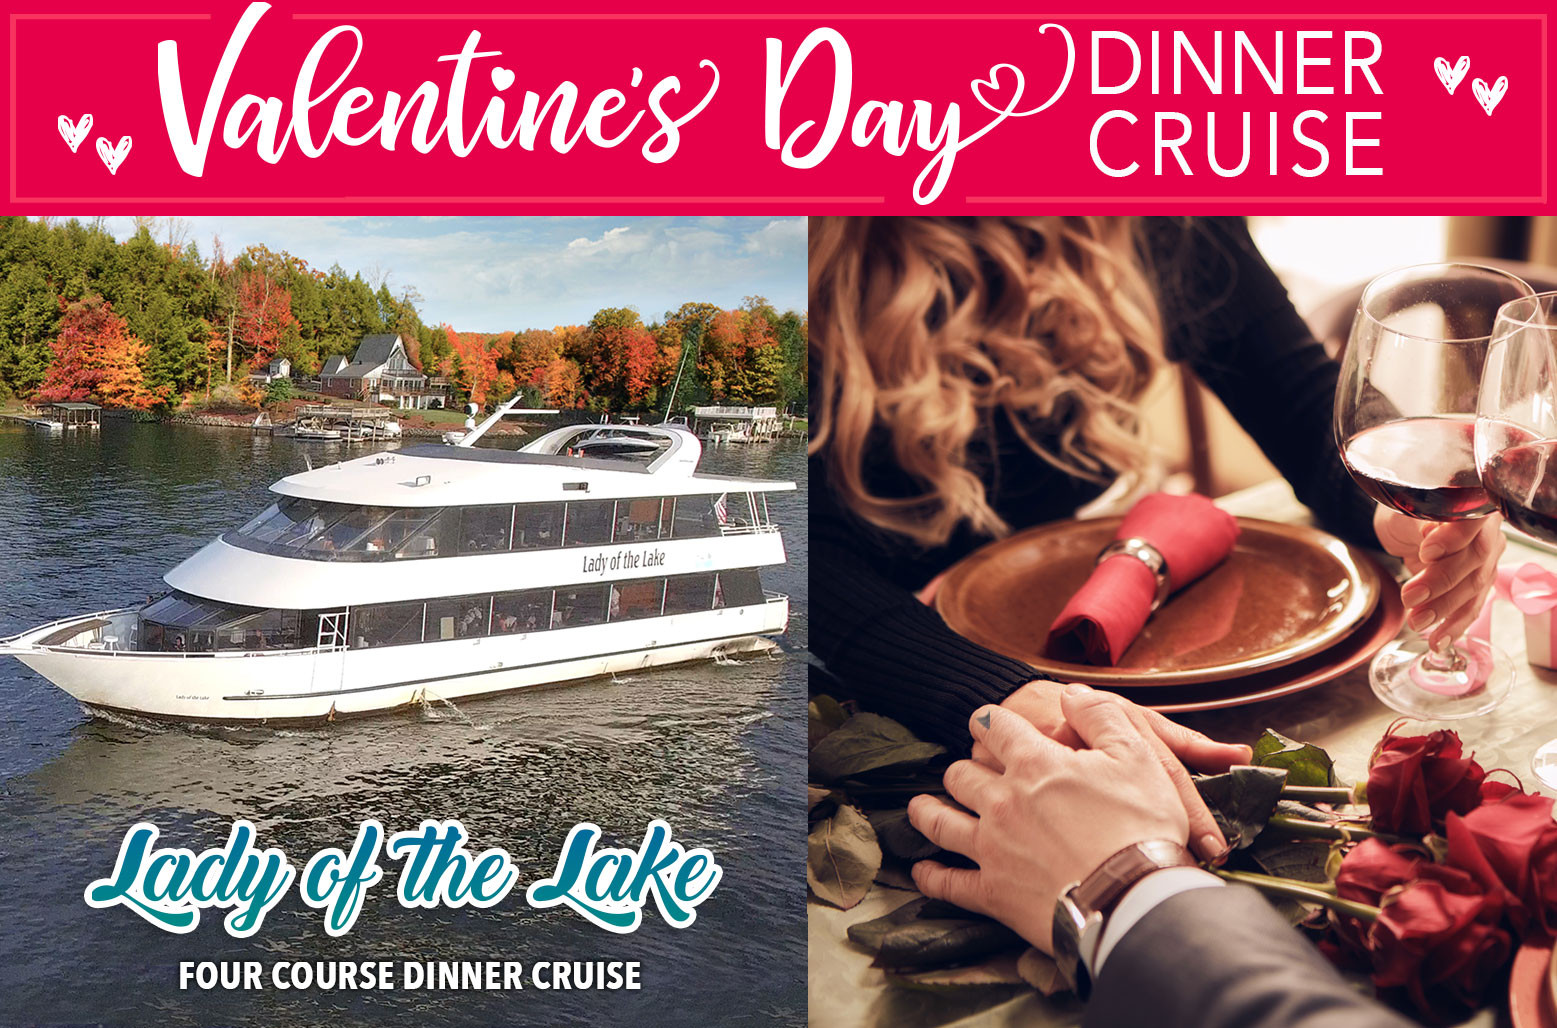 Valentine Day Dinner Cruise
 February 16th – Valentine’s Dinner Cruise “Lady of the